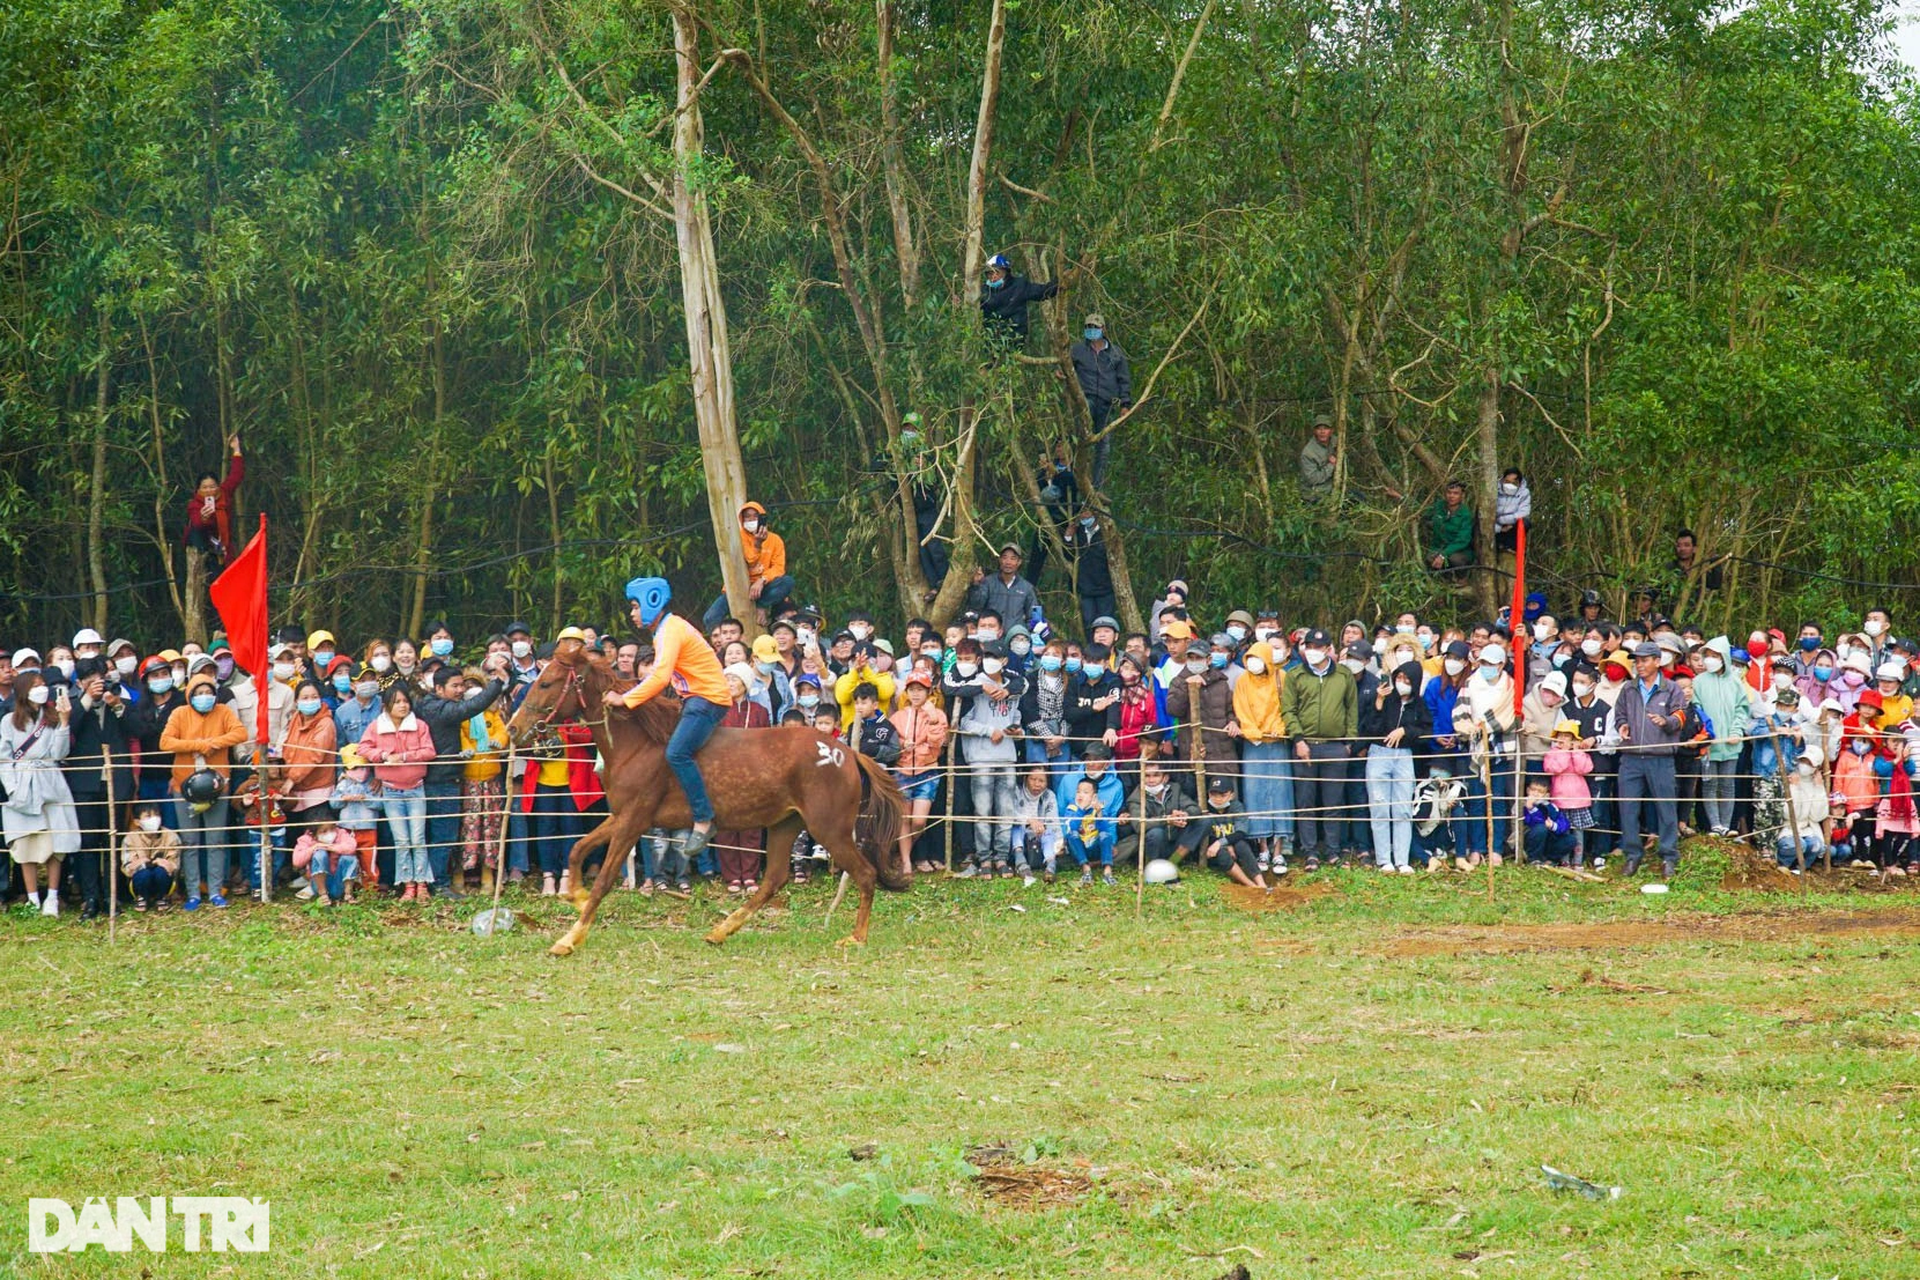 Thousands of people enjoy watching farmers race horses in Go Thi Thung festival - 7